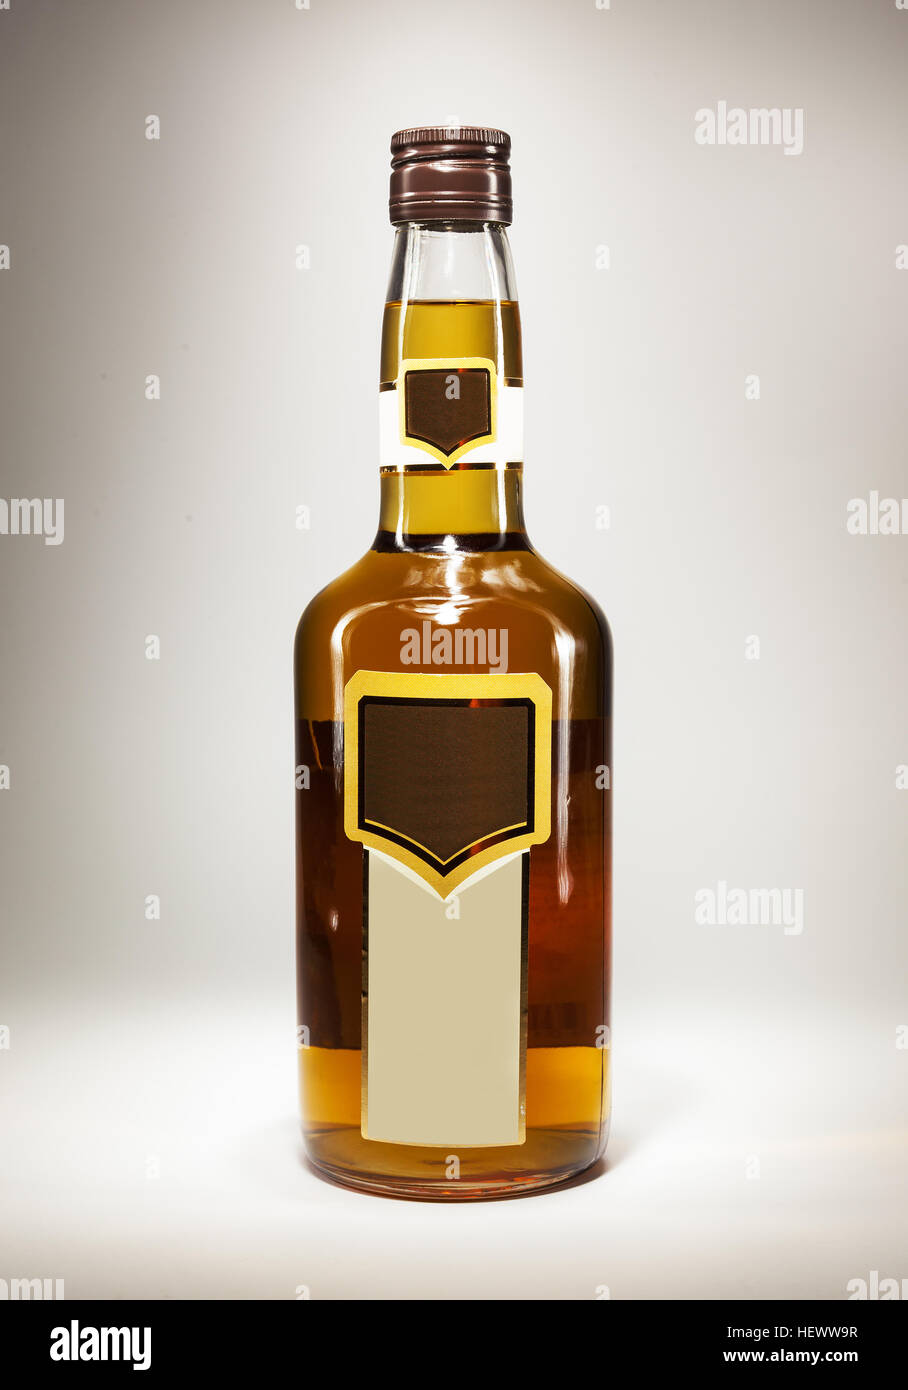 Just a bottle of a spirit drink on white background, with empty label. Stock Photo